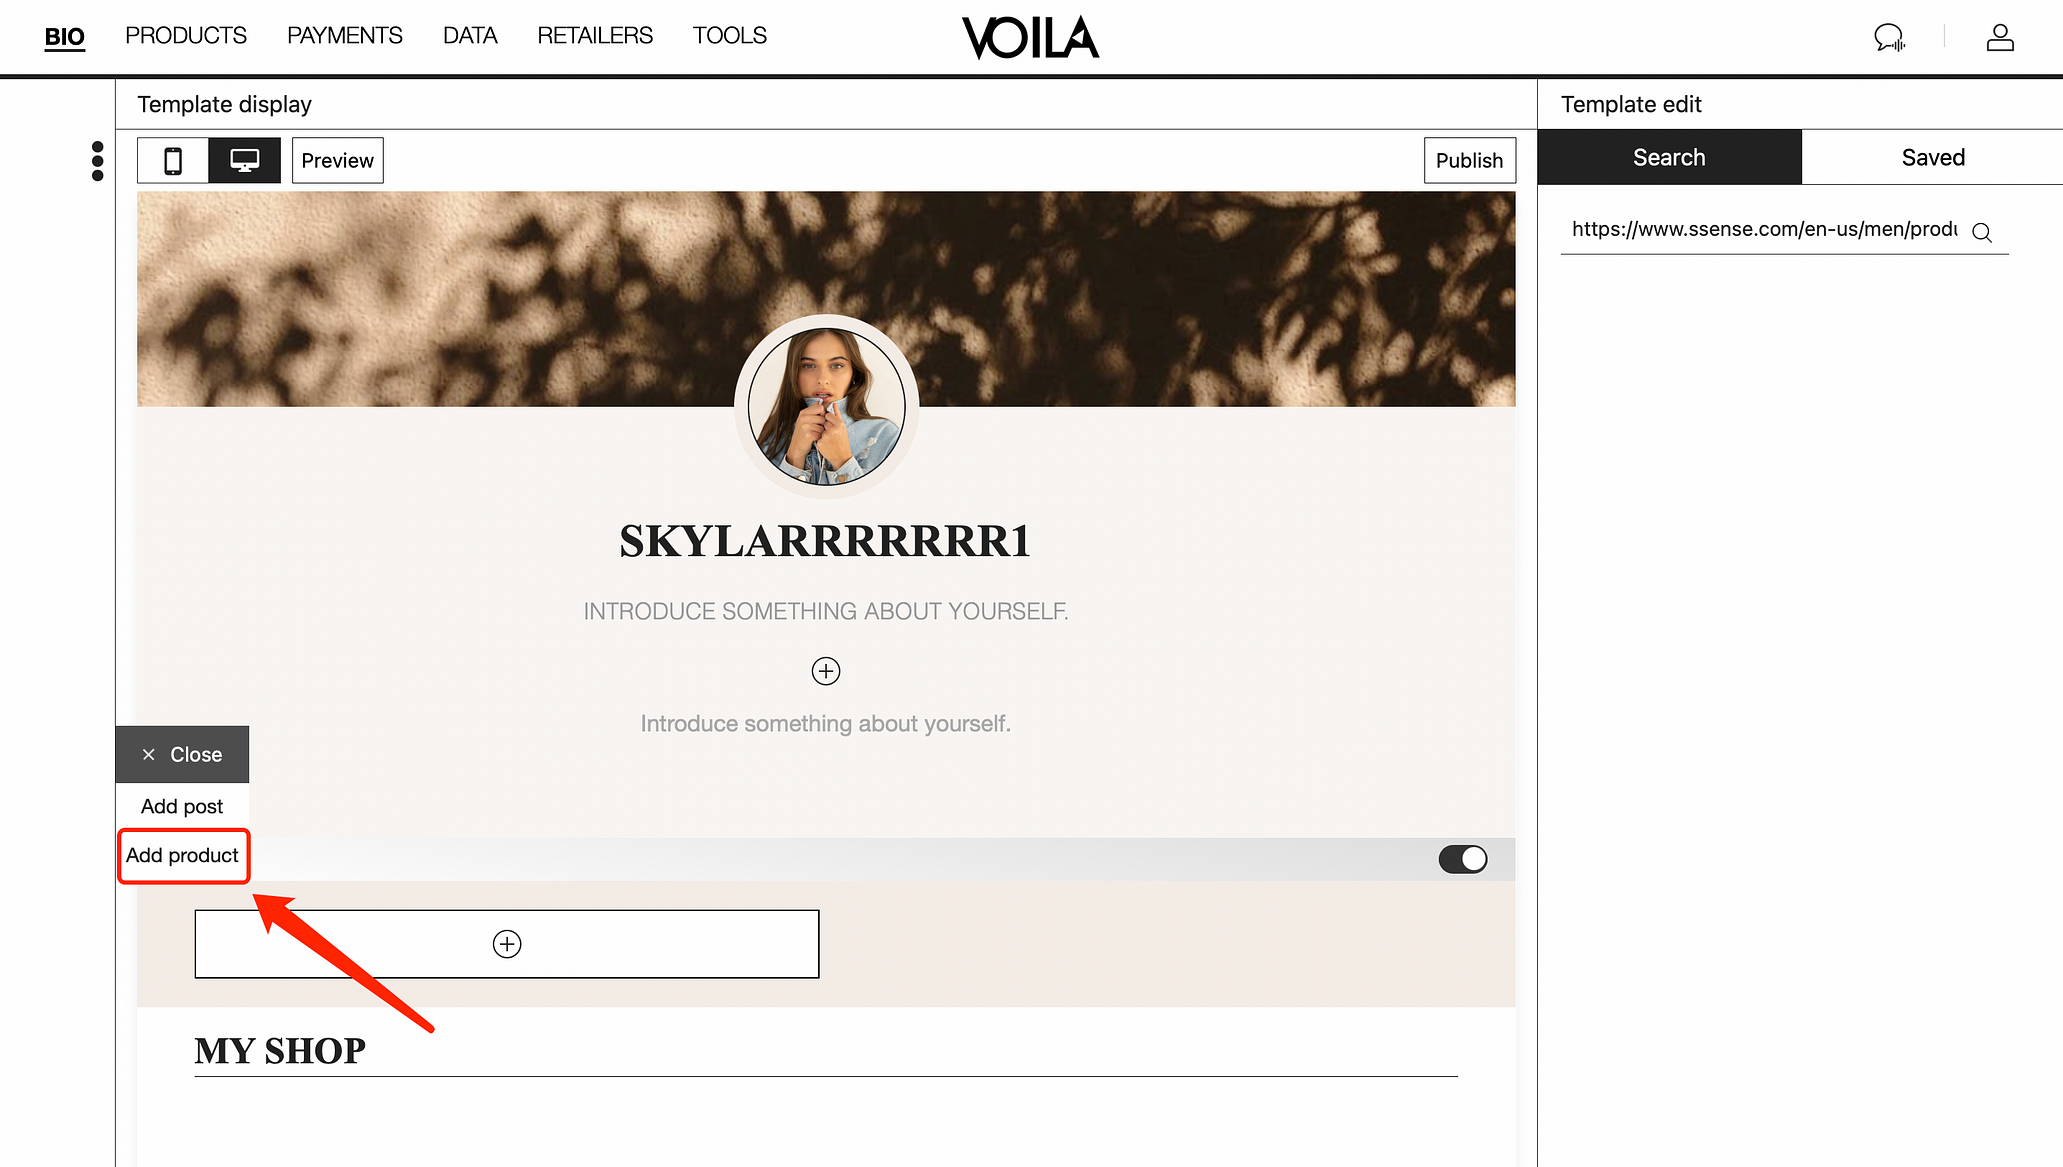 How to build your own Voila shop